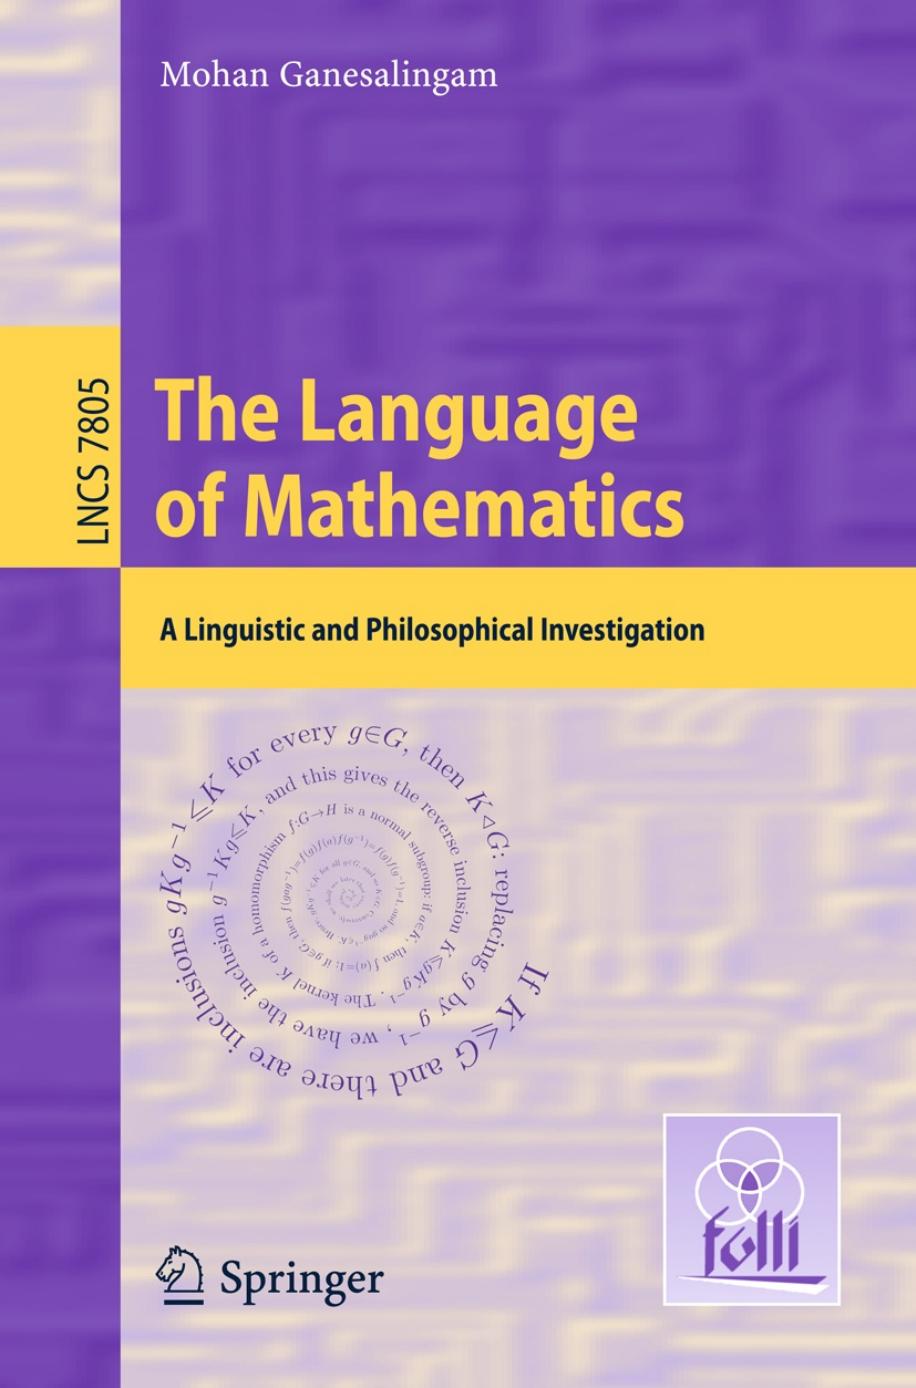 The Language of Mathematics: A Linguistic and Philosophical Investigation